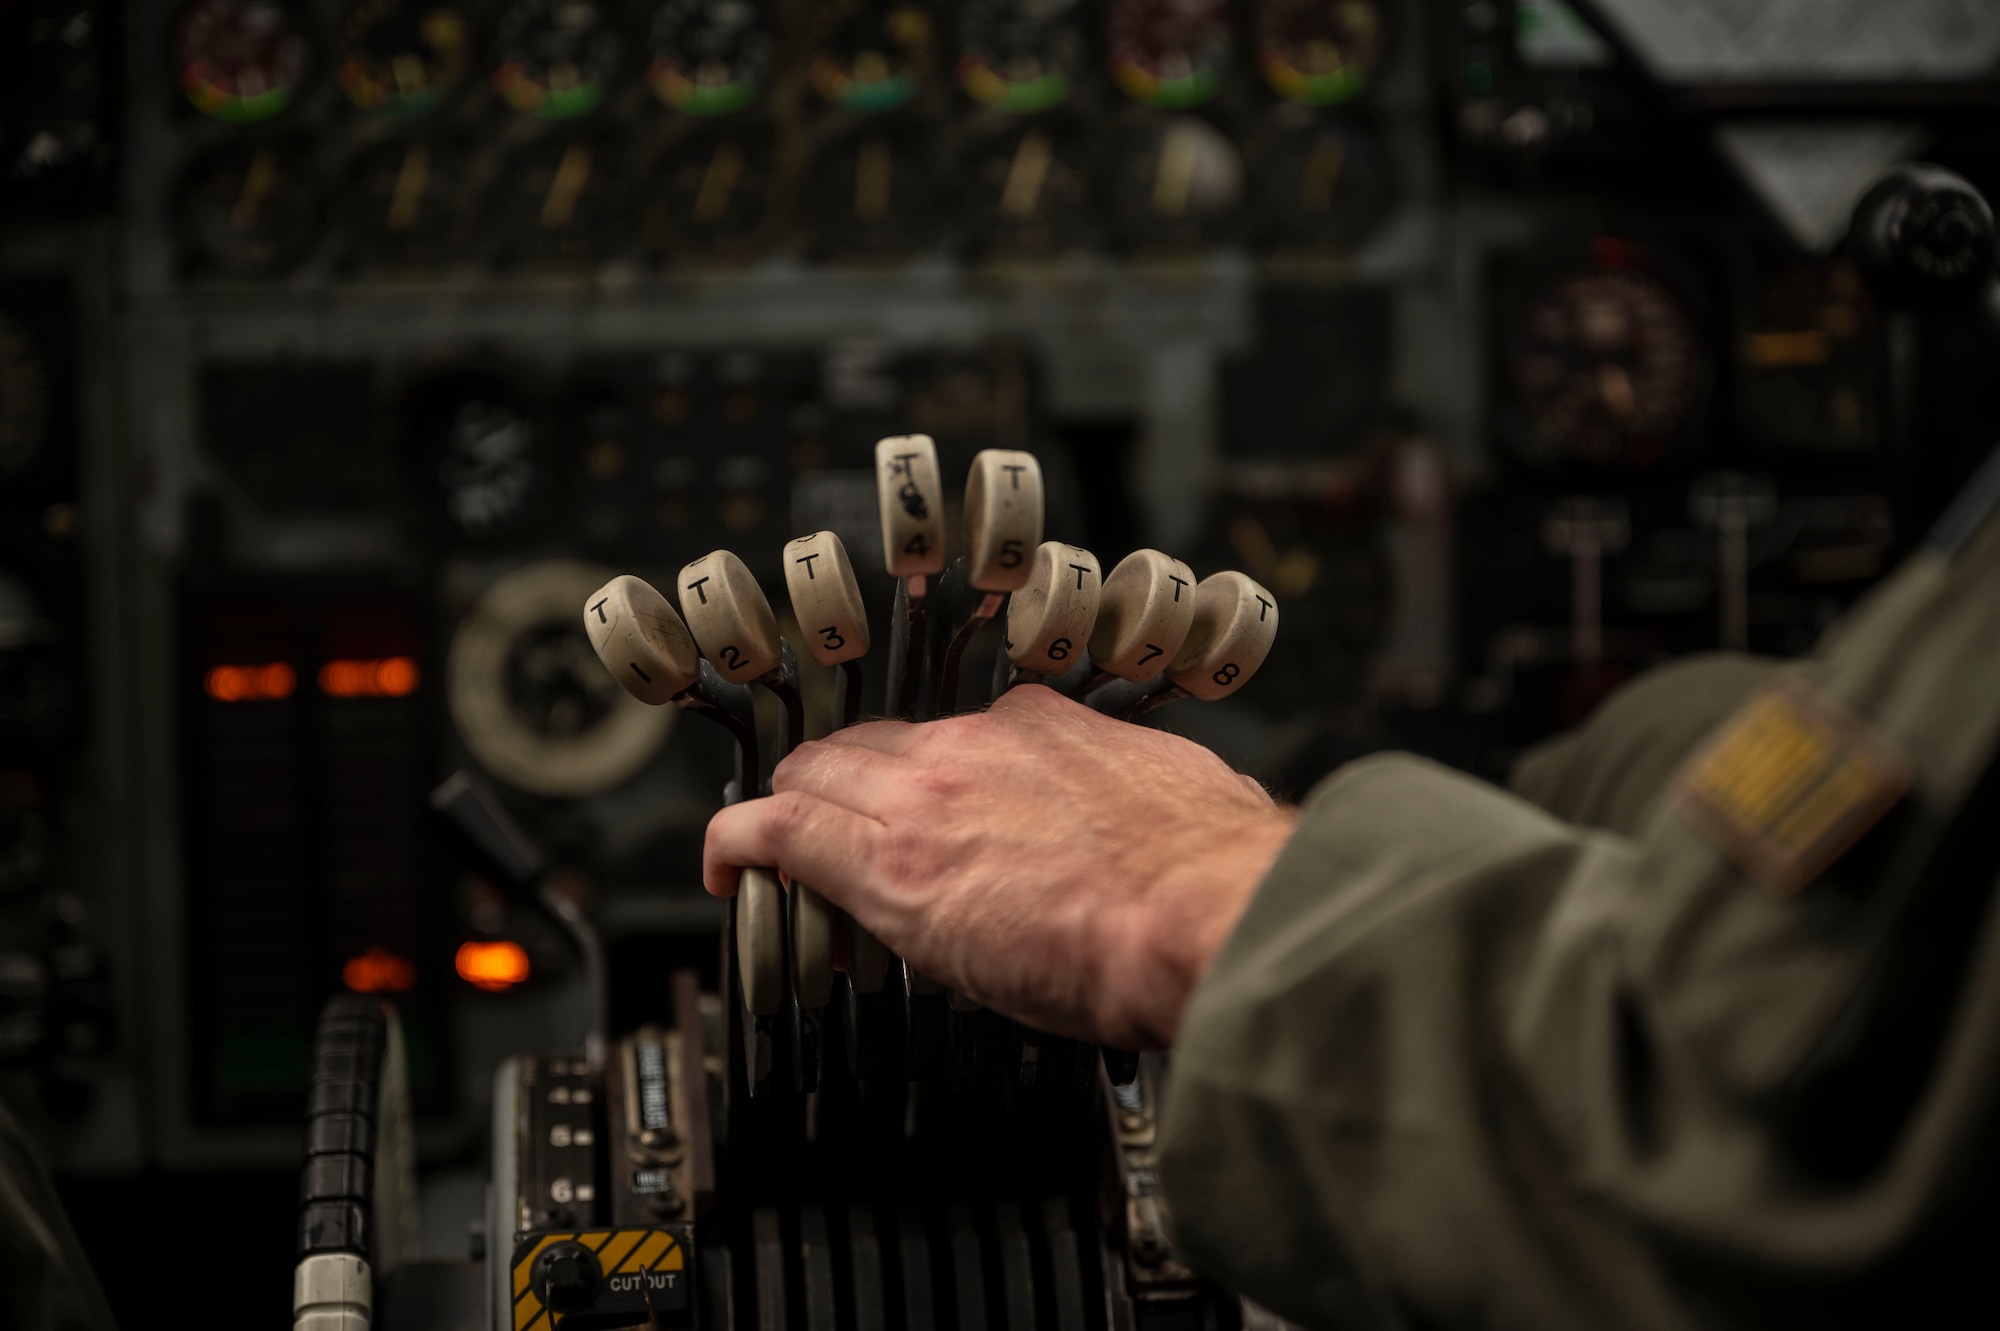 A U.S. Air Force B-52 Stratofortress aircrew member assigned to the 20th Bomb Squadron, Barksdale Air Force Base, Louisiana, prepares to take off August 31, 2021, at Andersen Air Force Base, Guam. This deployment allows aircrew and support personnel to conduct theater integration and to improve bomber interoperability with allies and partners. (U.S. Air Force photo by Senior Airman Charles T. Fultz)